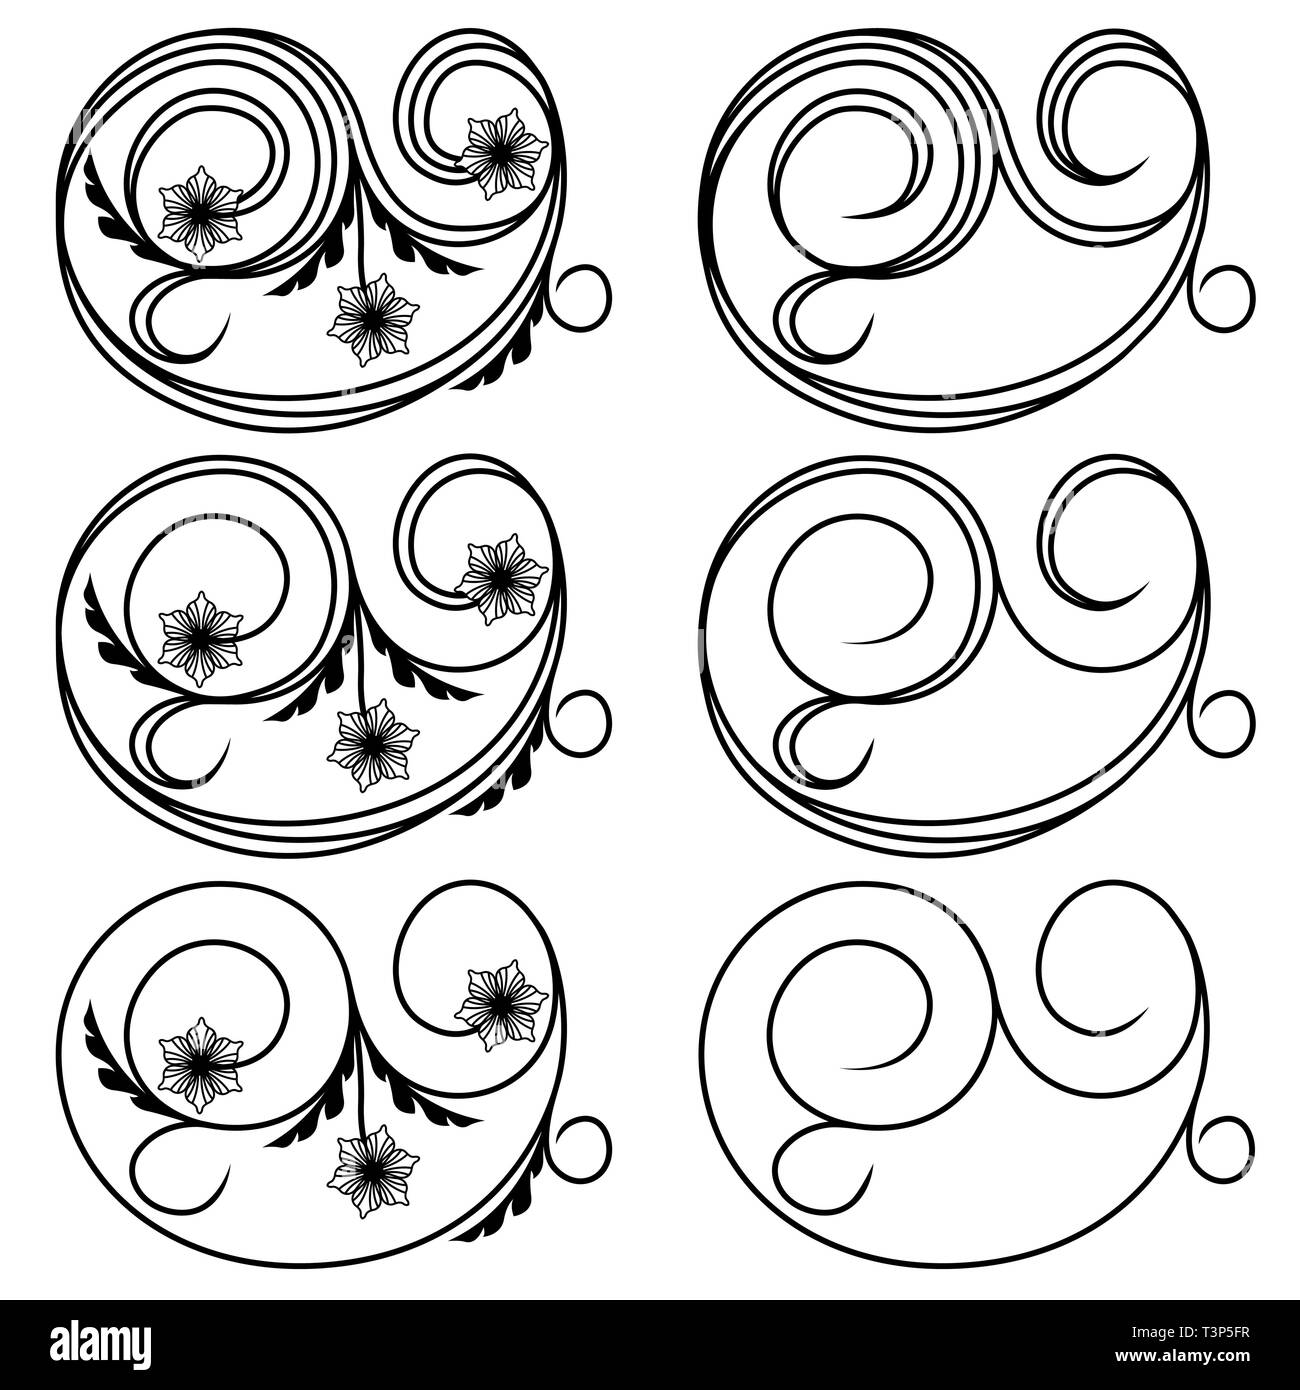 Set of ornamental design elements with leaves and flowers, vector illustration Stock Vector